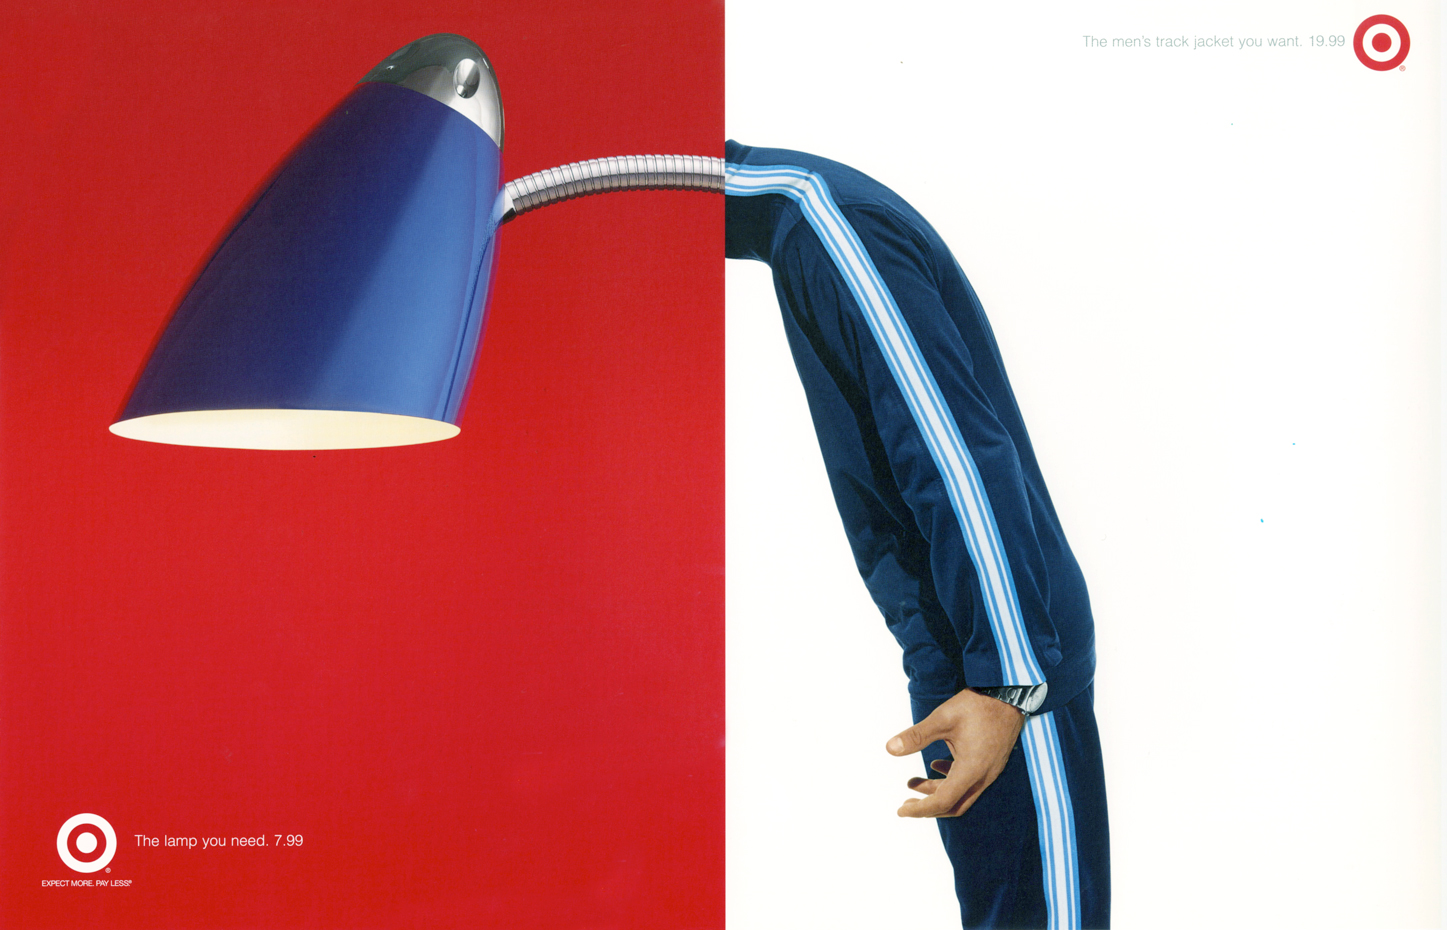 Target, Wants Needs '04, lamp campaign image